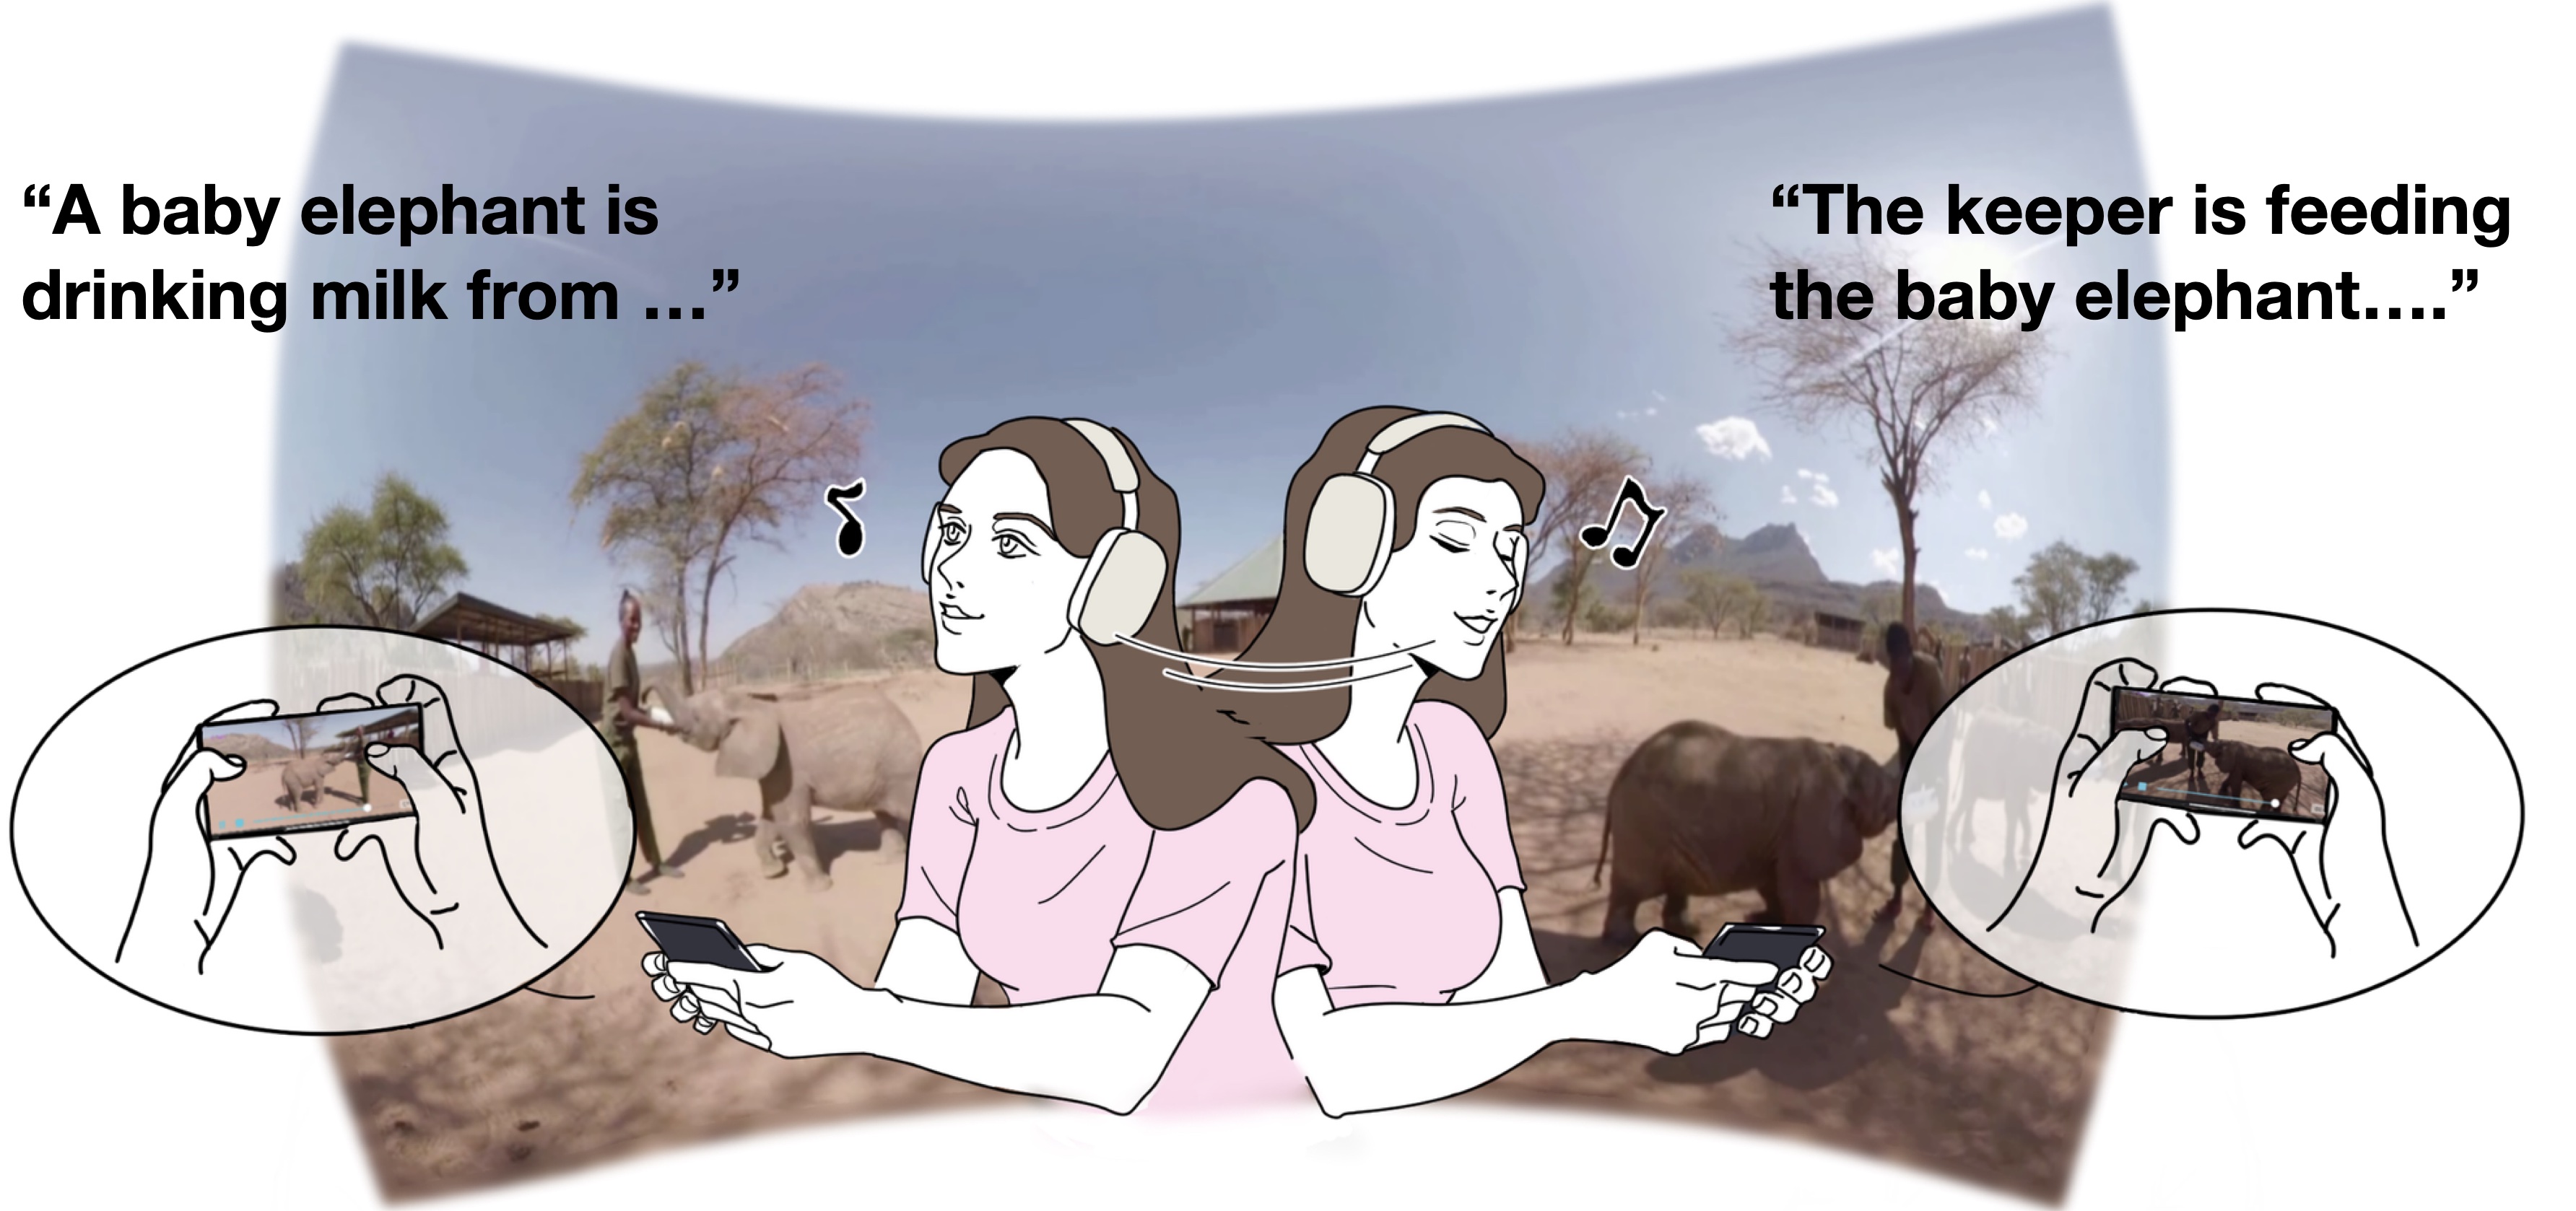 This figure demonstrates the mobile prototype. Using a headphone and a smartphone, BVI users, the woman in this picture, can acquire the object descriptions by orienting themselves to the anchored objects in 3D space. In this figure, the woman will hear the description “A baby elephant is drinking milk from …” when turning her head to the right. If turning her head to the left, she will hear the description “The keeper is feeding the baby elephant.